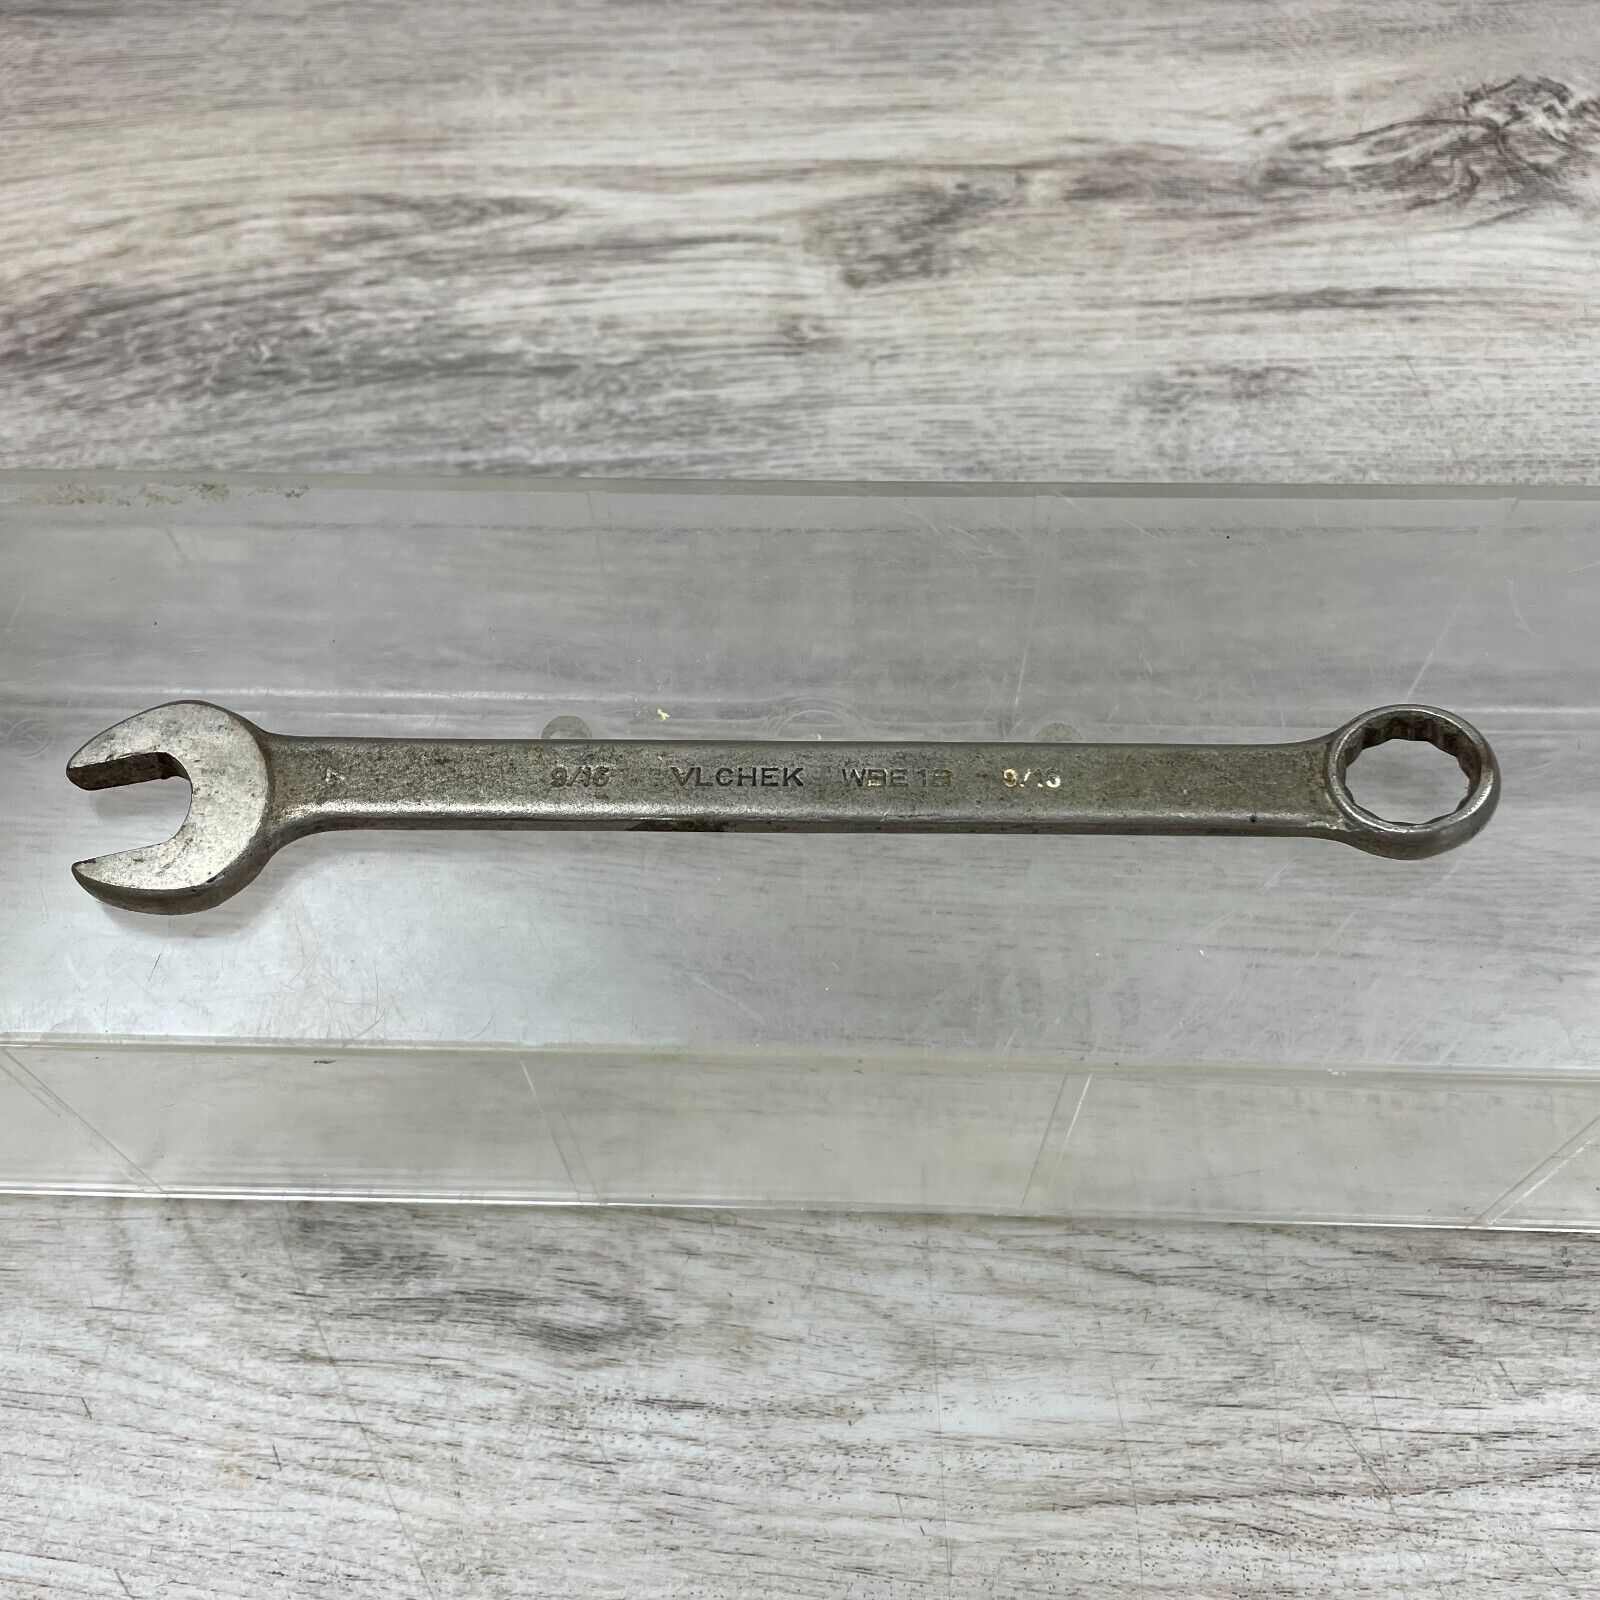 Vintage Vlchek USA WBE18 SAE 9/16” Combination Wrench 12 Point Alloy